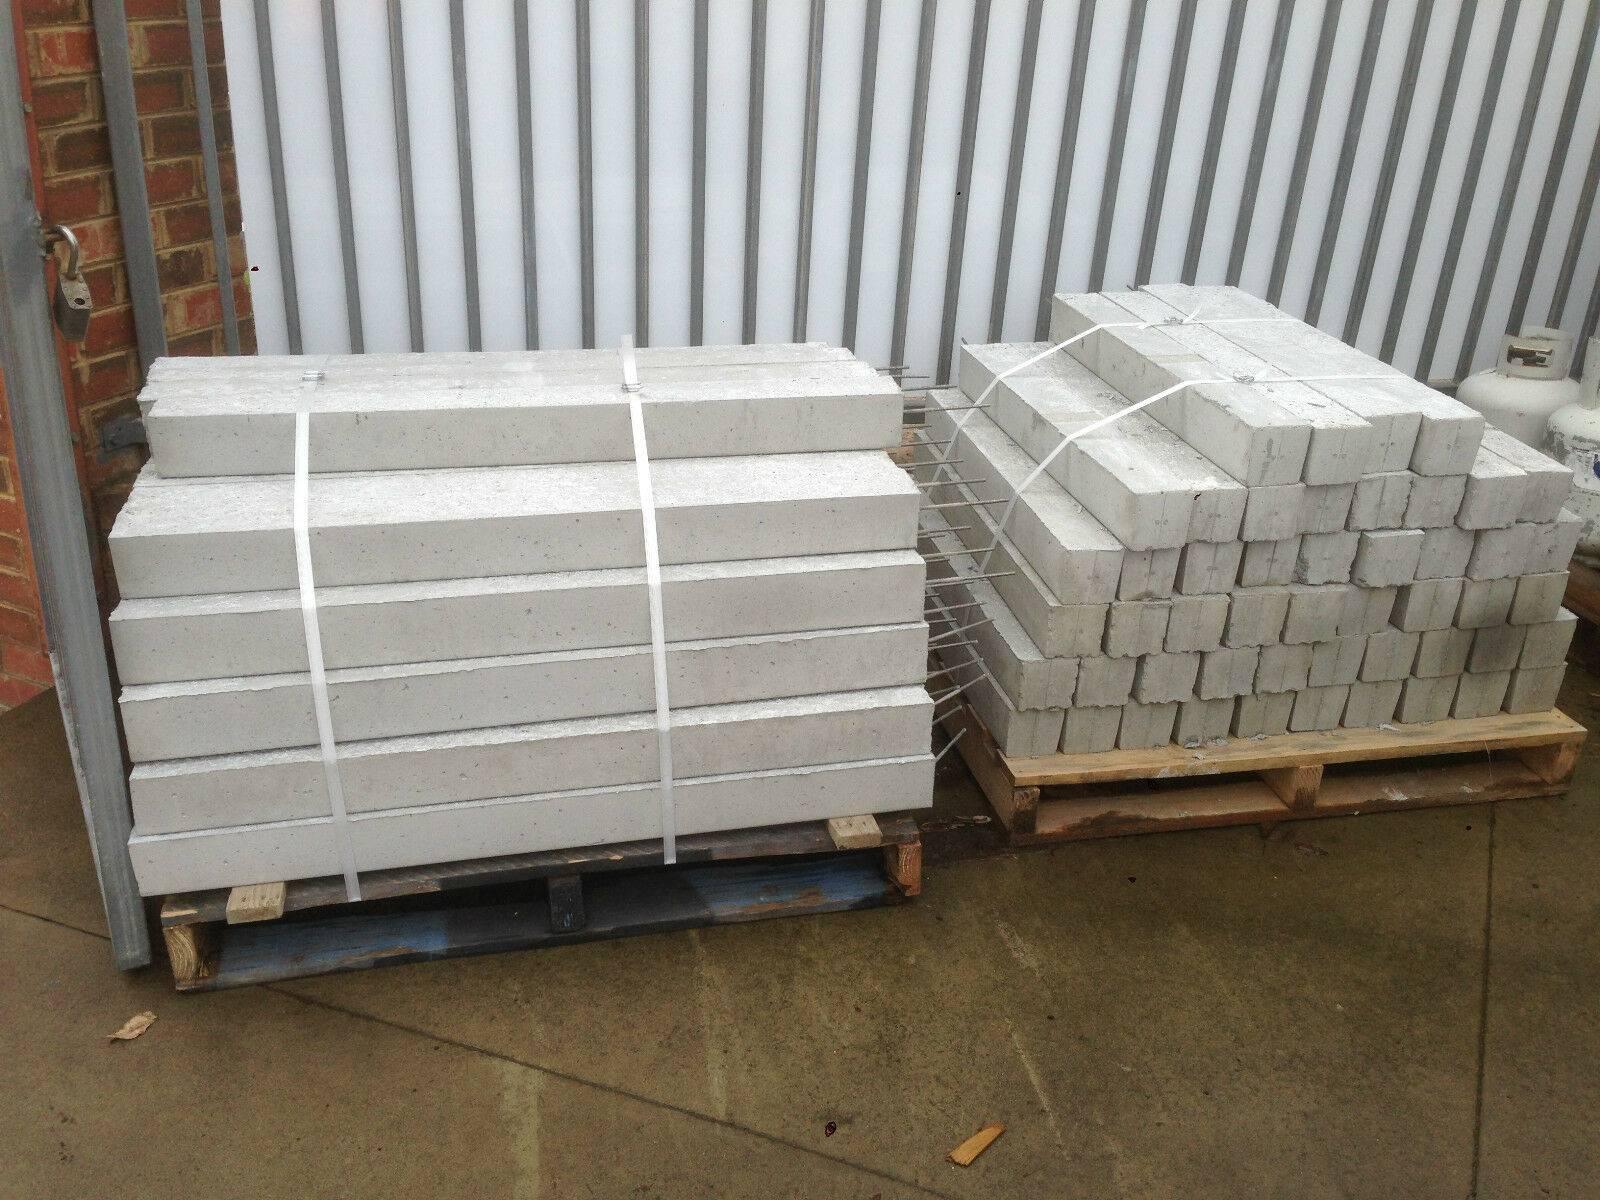 Any supplier of concrete Stumps in WA?